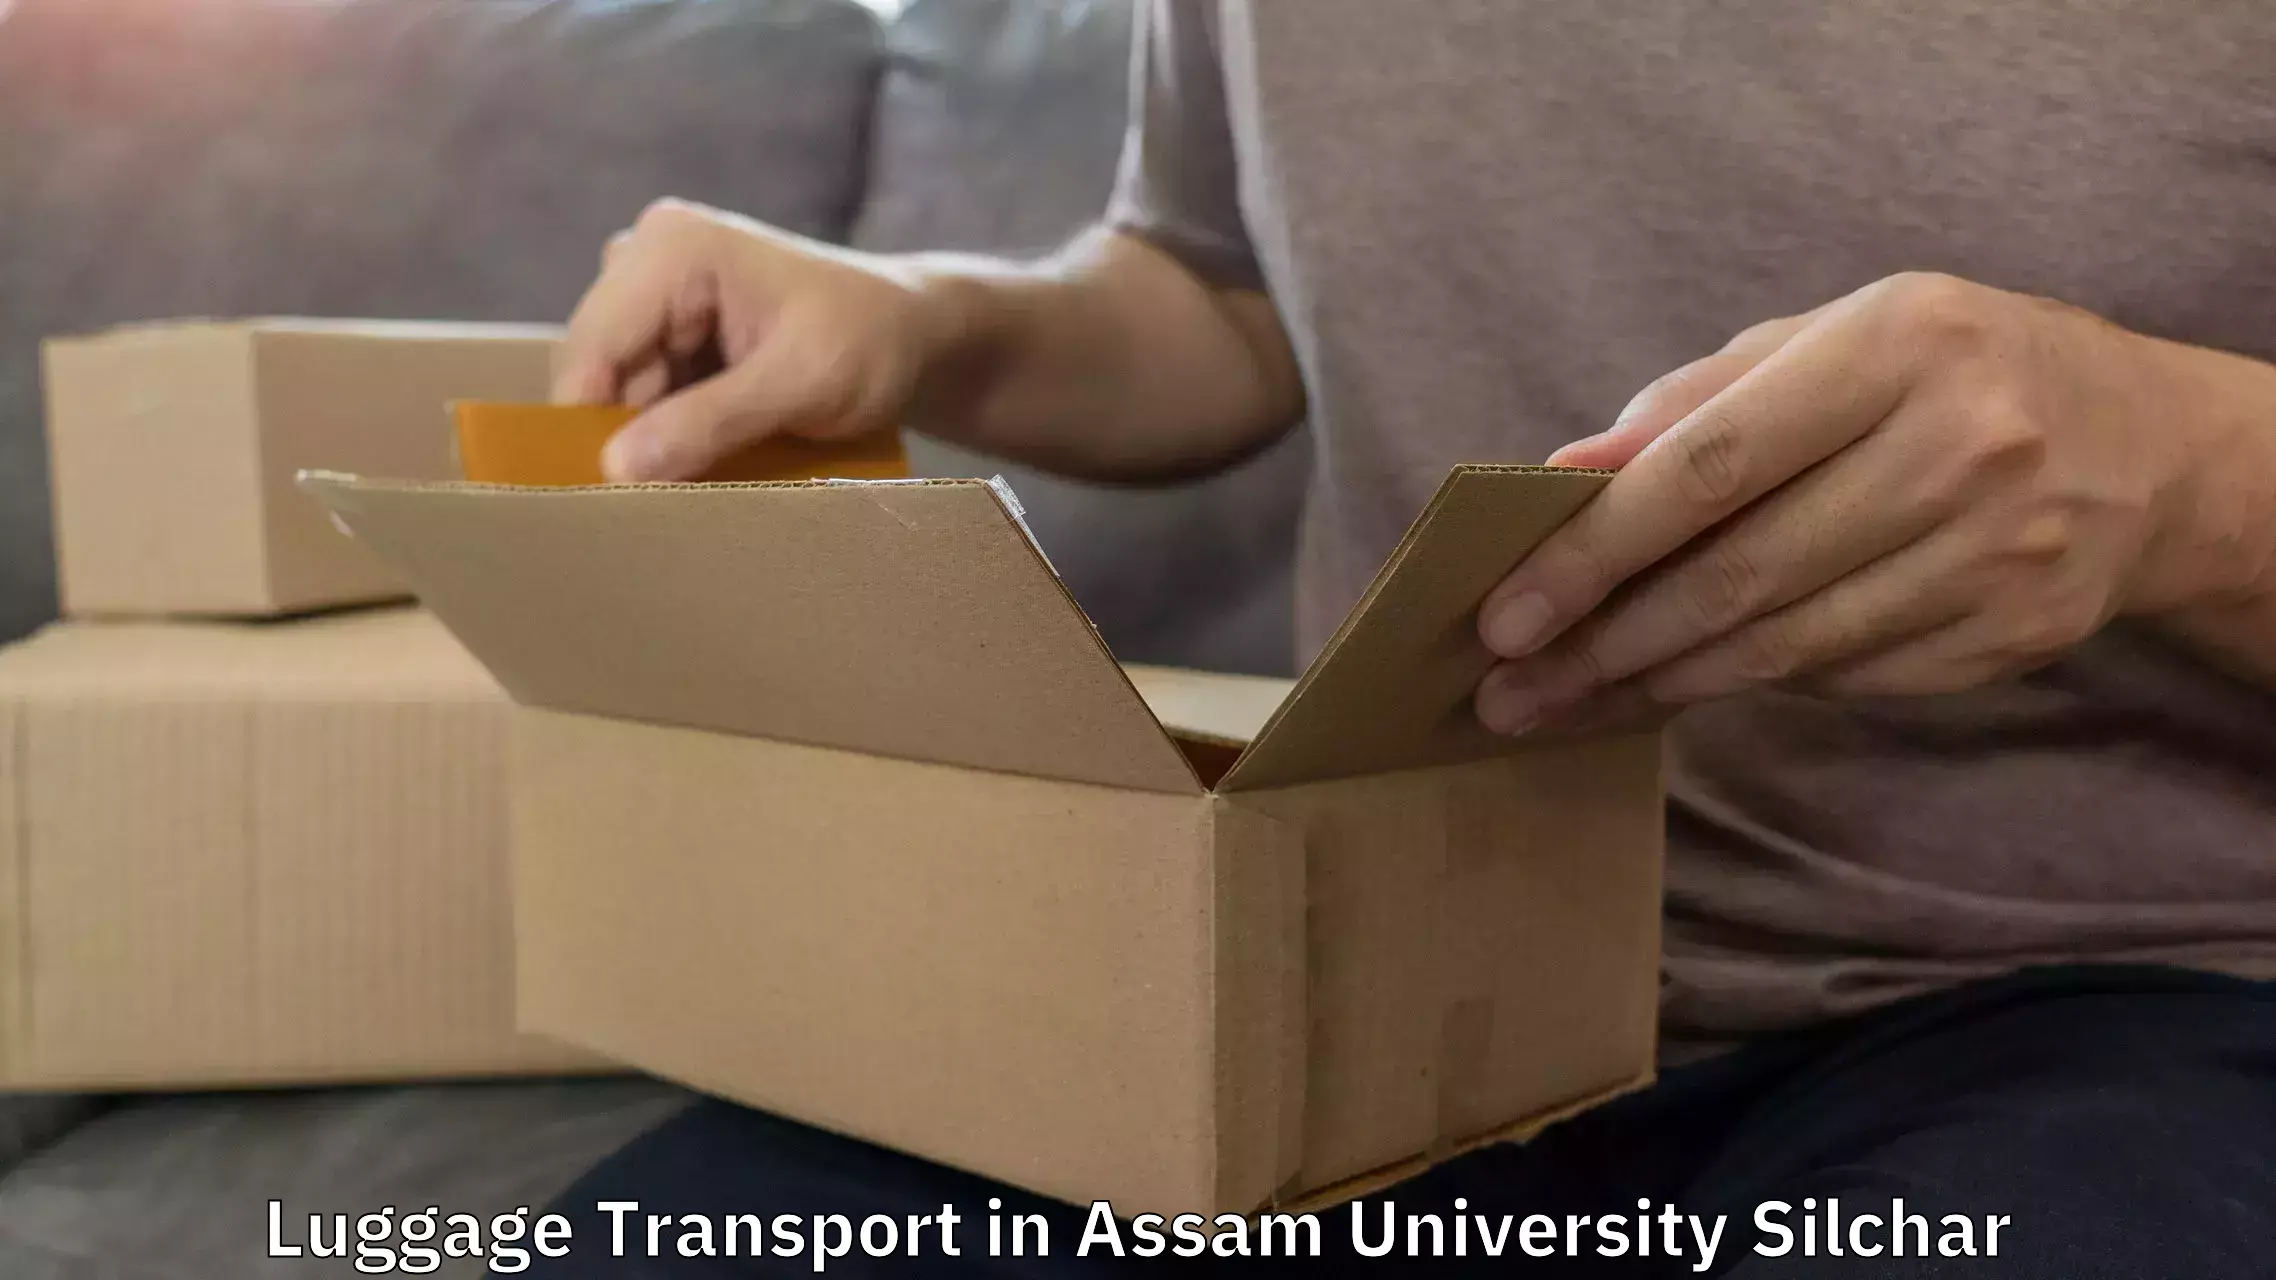 Luggage shipment specialists in Assam University Silchar